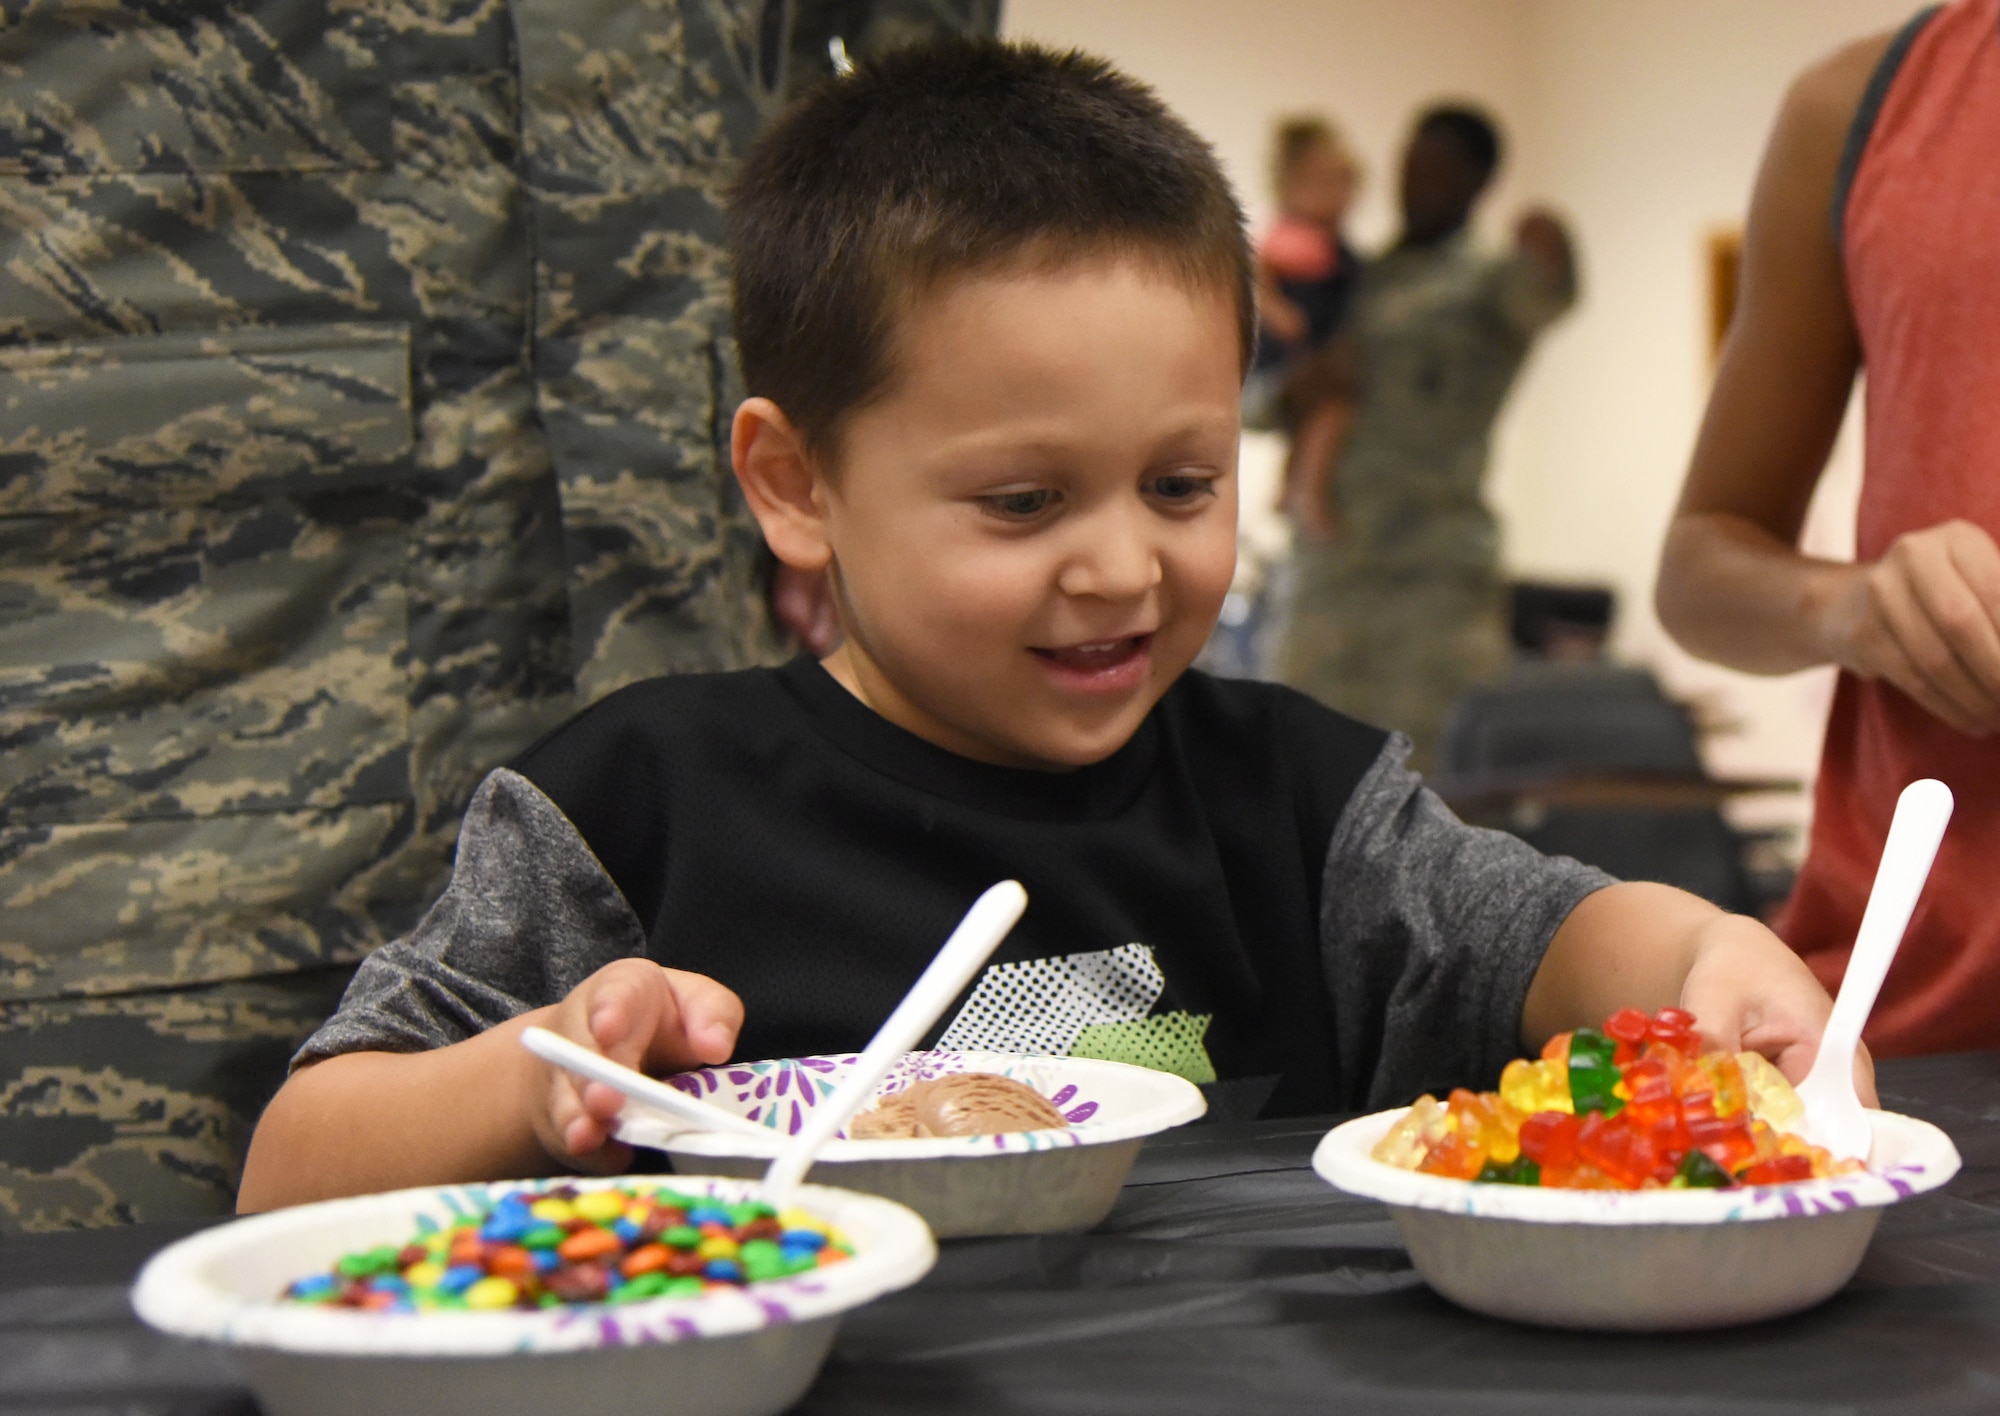 Everett Garcia, son of 2nd Lt. Anthony Garcia, 81st Security Forces Squadron operations officer, reaches for gummy bears during a family ice cream social at the 81st SFS building July 27, 2017, on Keesler Air Force Base, Miss. The event, hosted by the 81st SFS Defenders Council and Key Spouses, also consisted of a military working dog demonstration and a combat arms weapons display. (U.S. Air Force photo by Kemberly Groue)